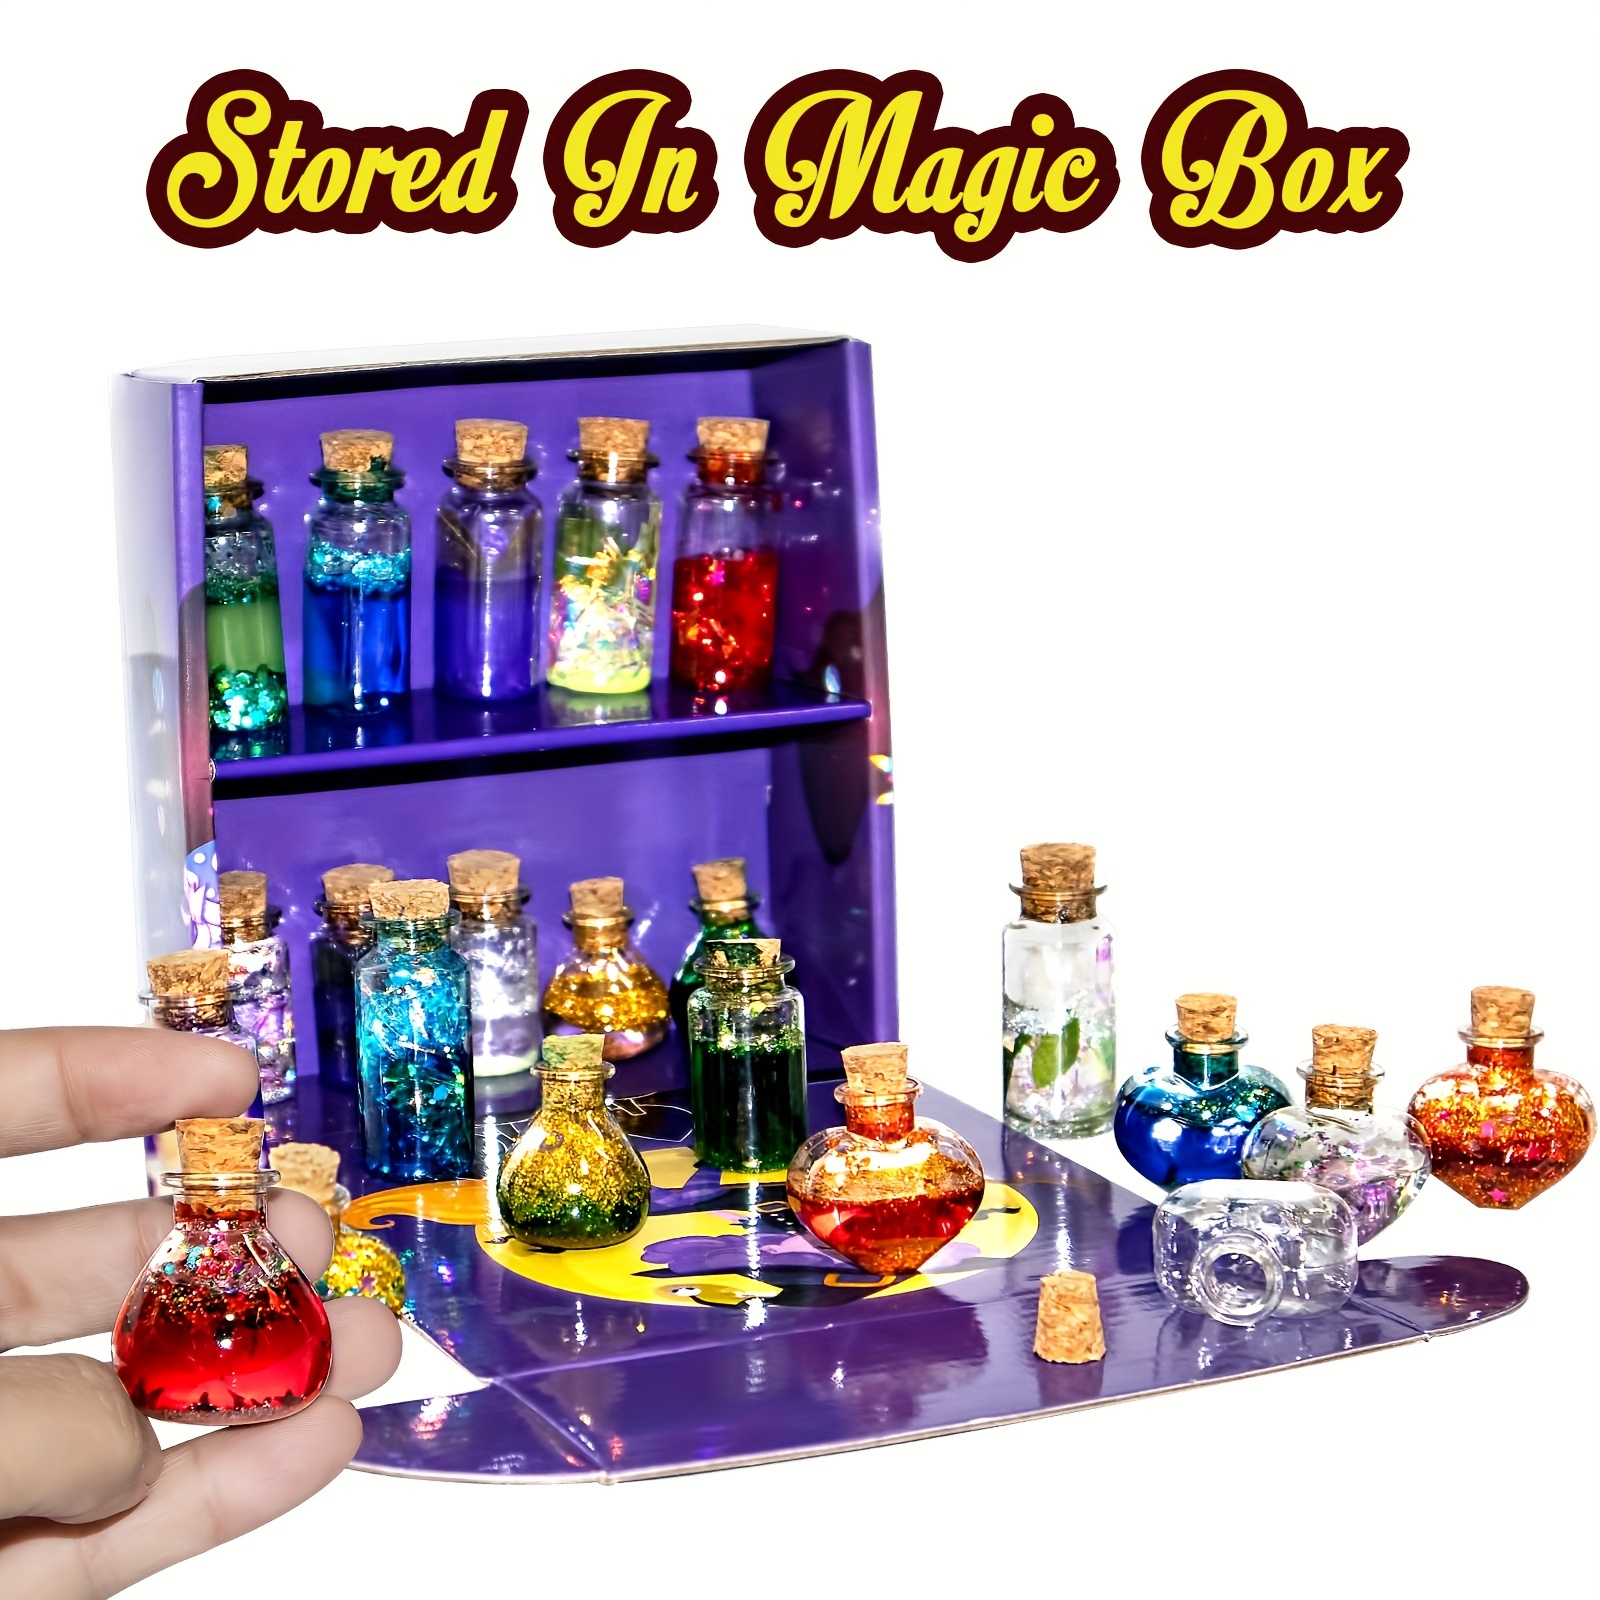 Fairy Magic Potions Craft Kit for Kids with 20PCS Magic Potion Bottles -  Magical Fairy Potions Making Craft Kit - Gift for Christma, Birthday